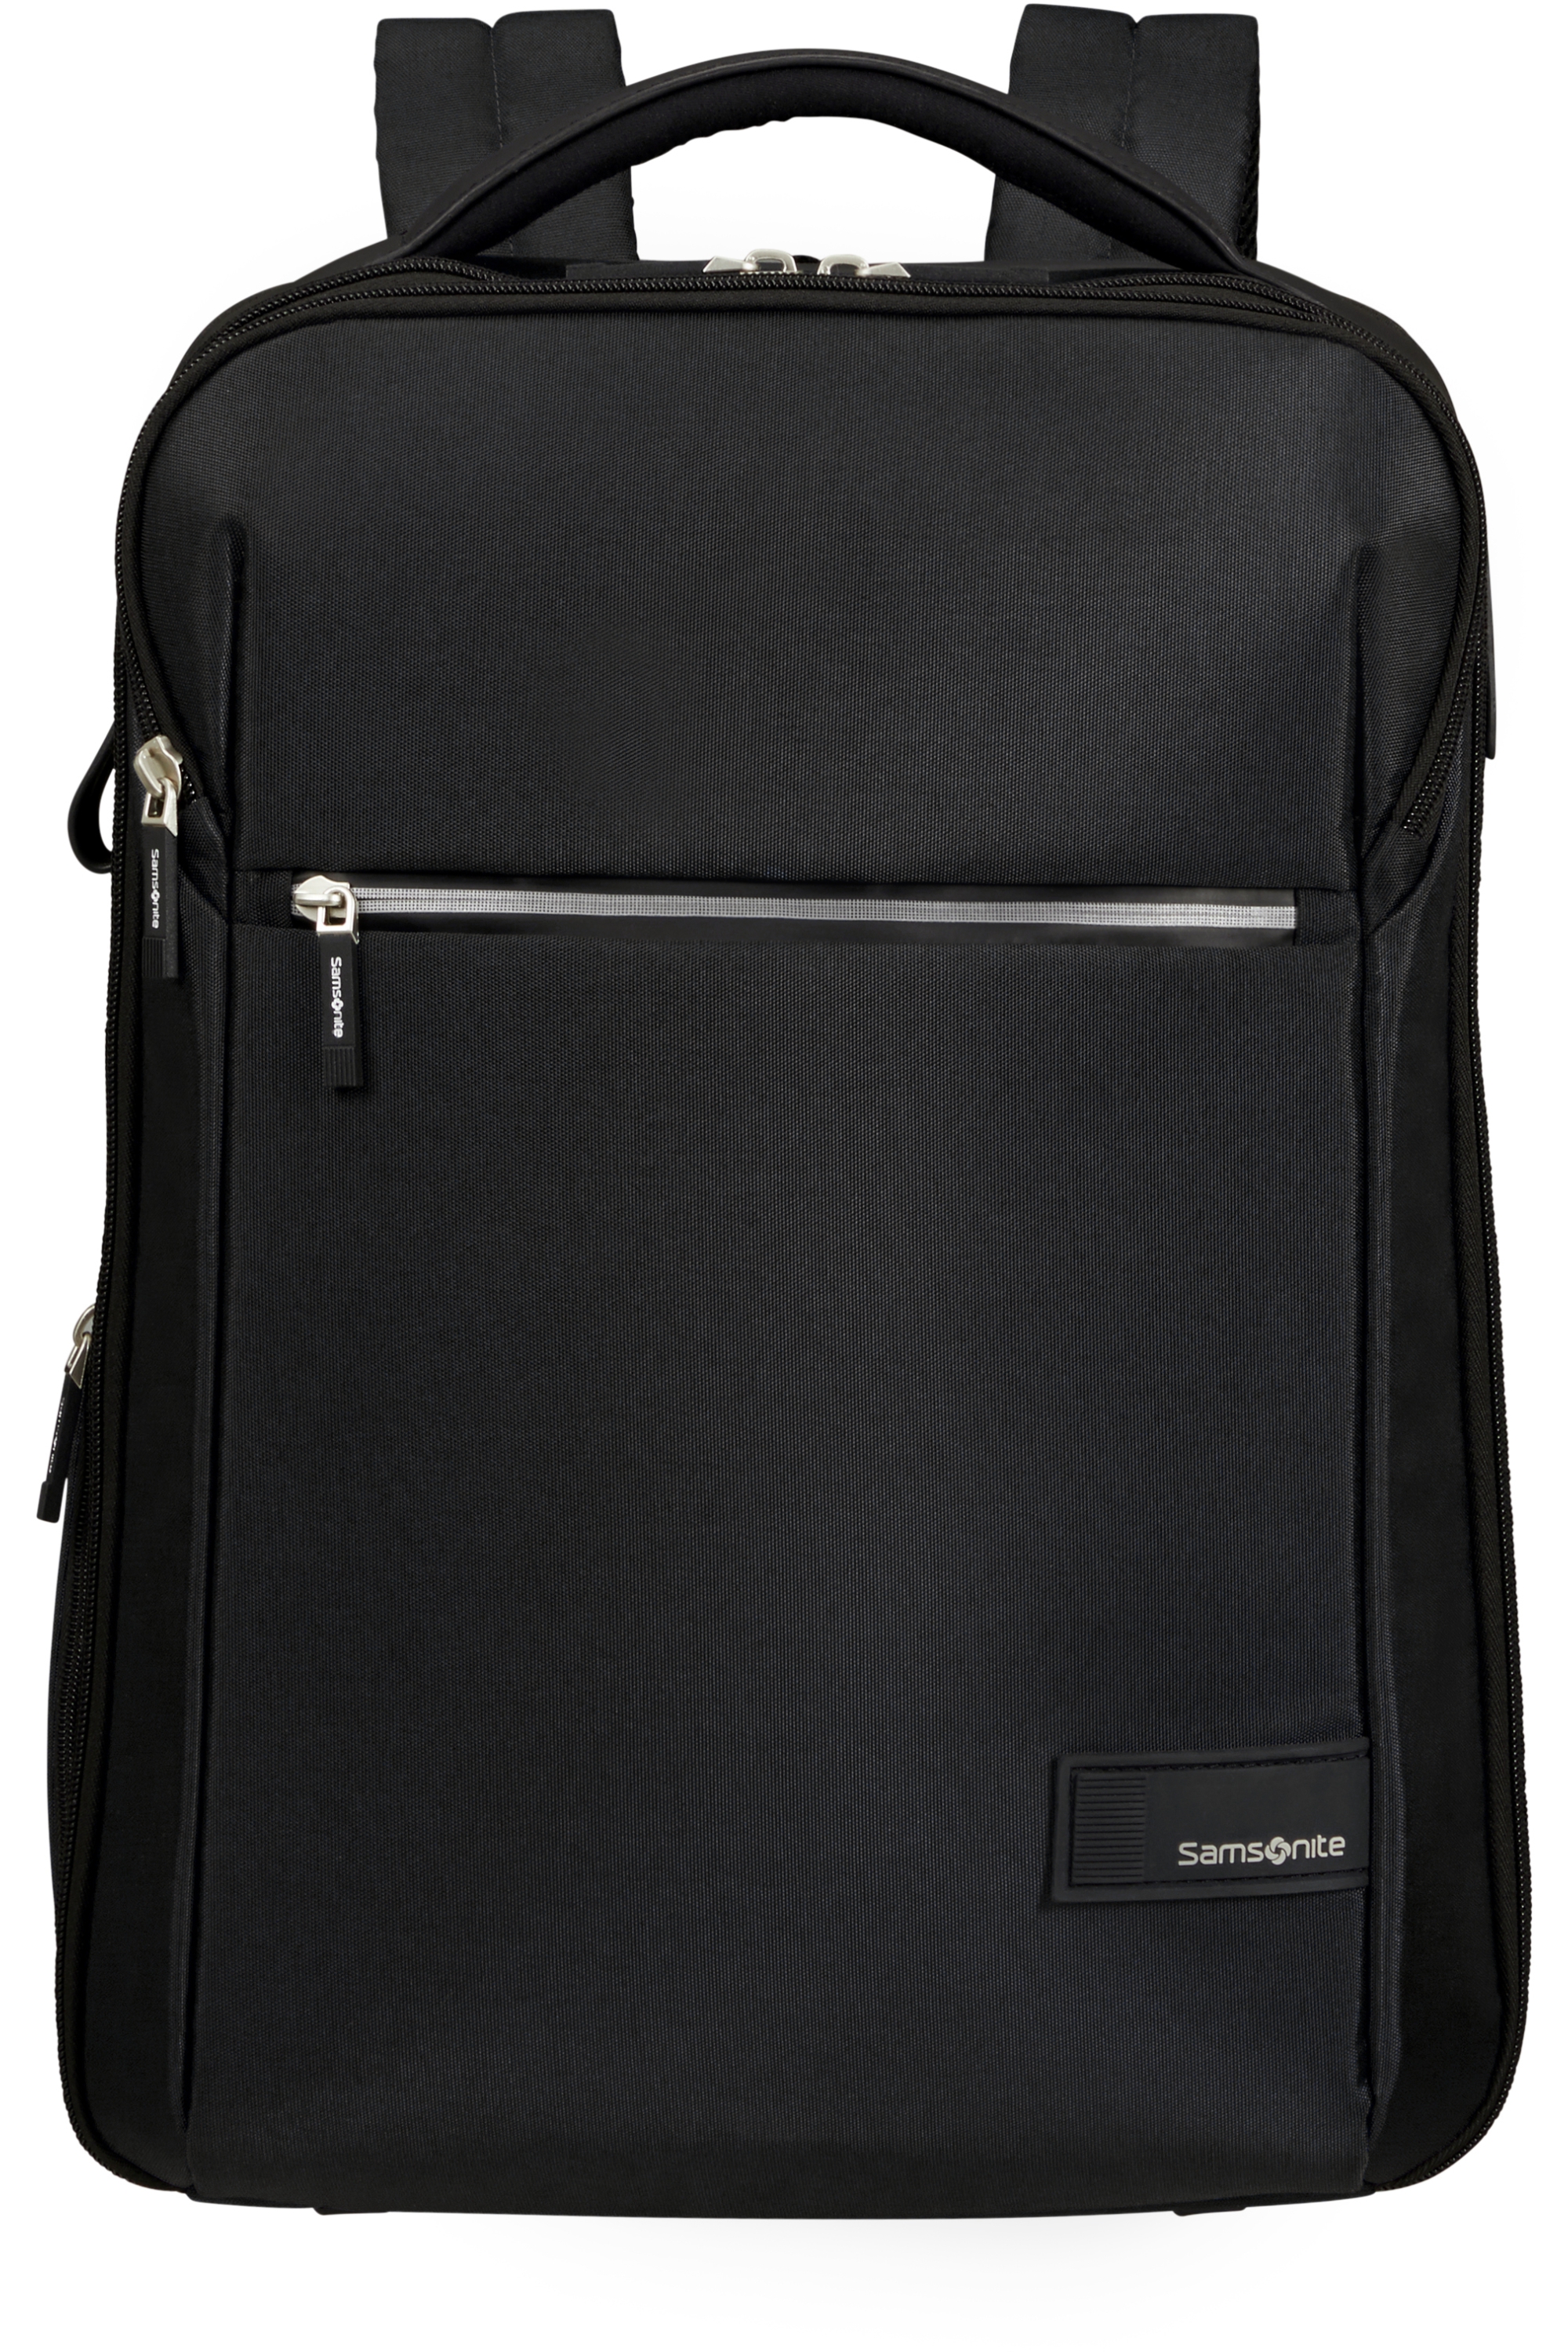 134550-1041-134550_1041_litepoint_lapt-_backpack_17-3_exp_front-58d8a3bf-83fa-41e3-8a43-ab640089ea08-png